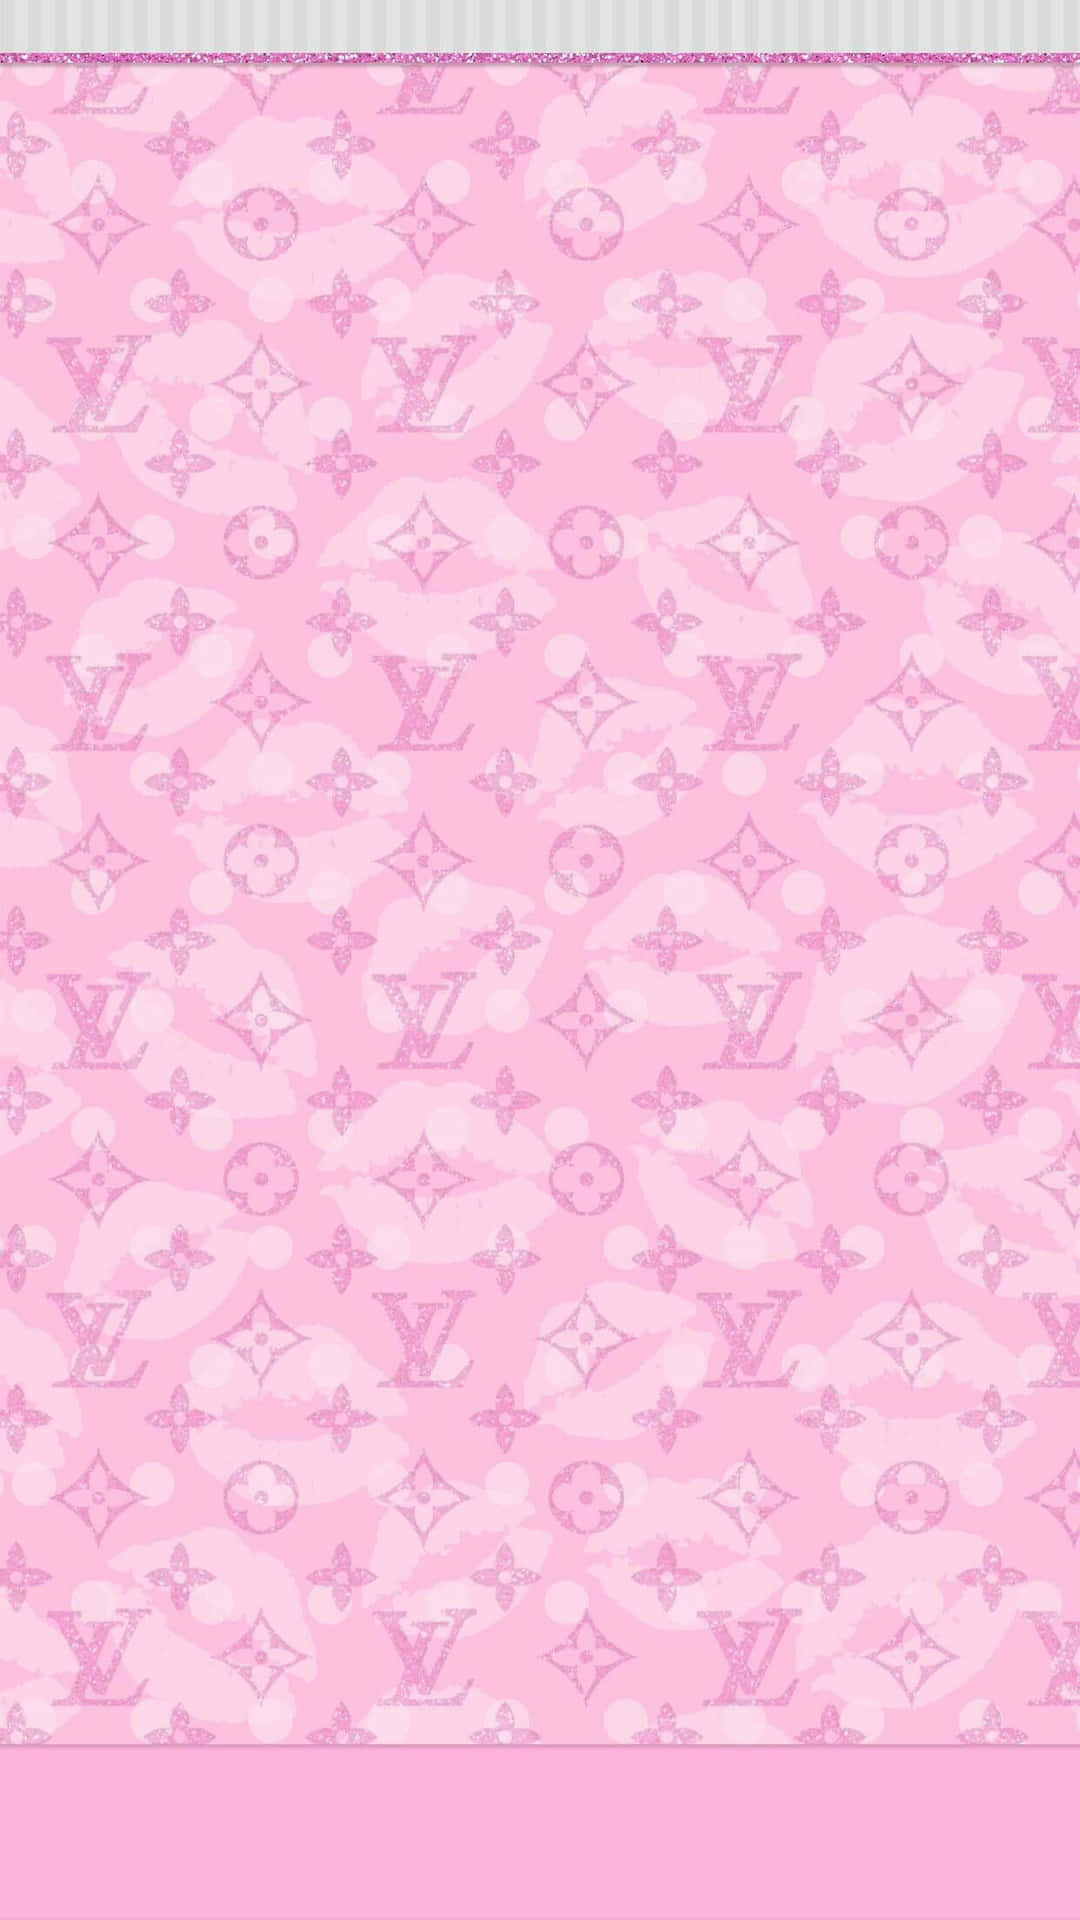 Download Add a splash of pink to your wardrobe with the timeless style of Louis  Vuitton Wallpaper